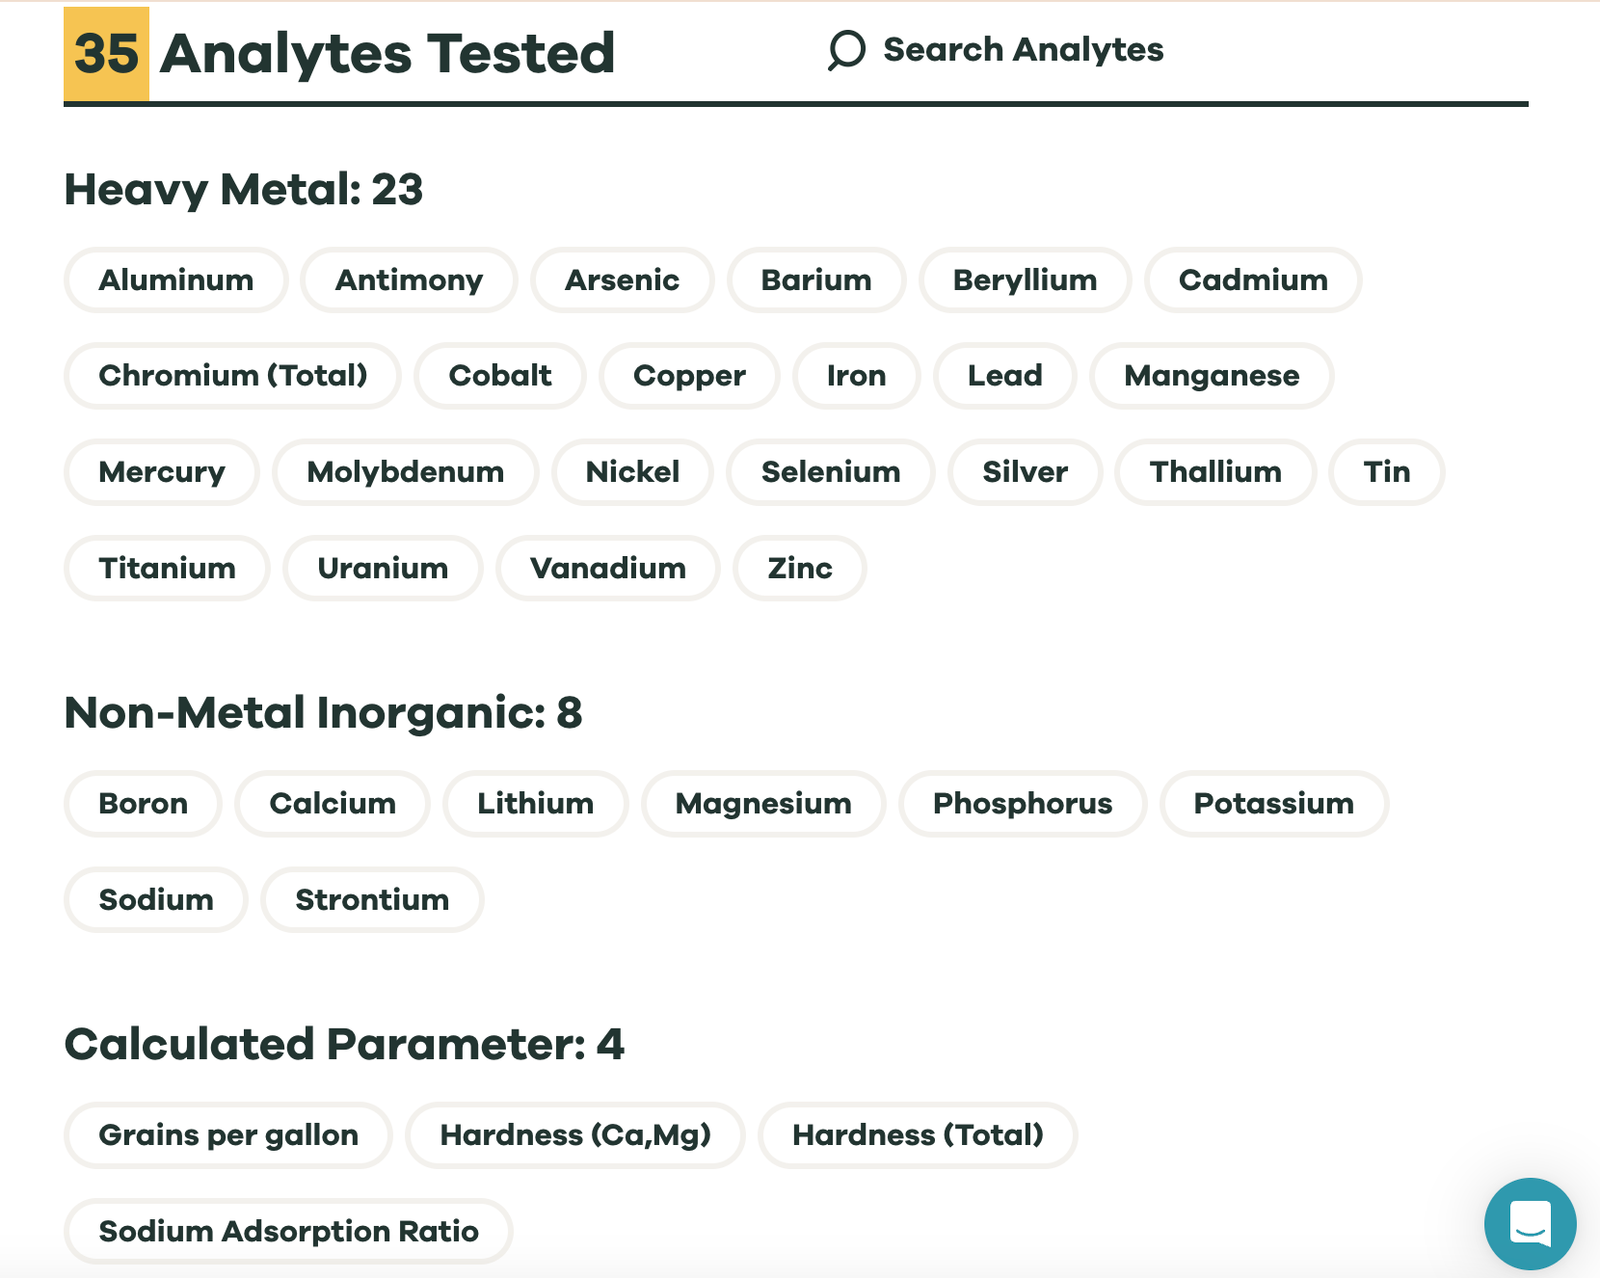 Image showing 35 analytes tested for the metas and Minerals Testing by the MyTapScore.com company